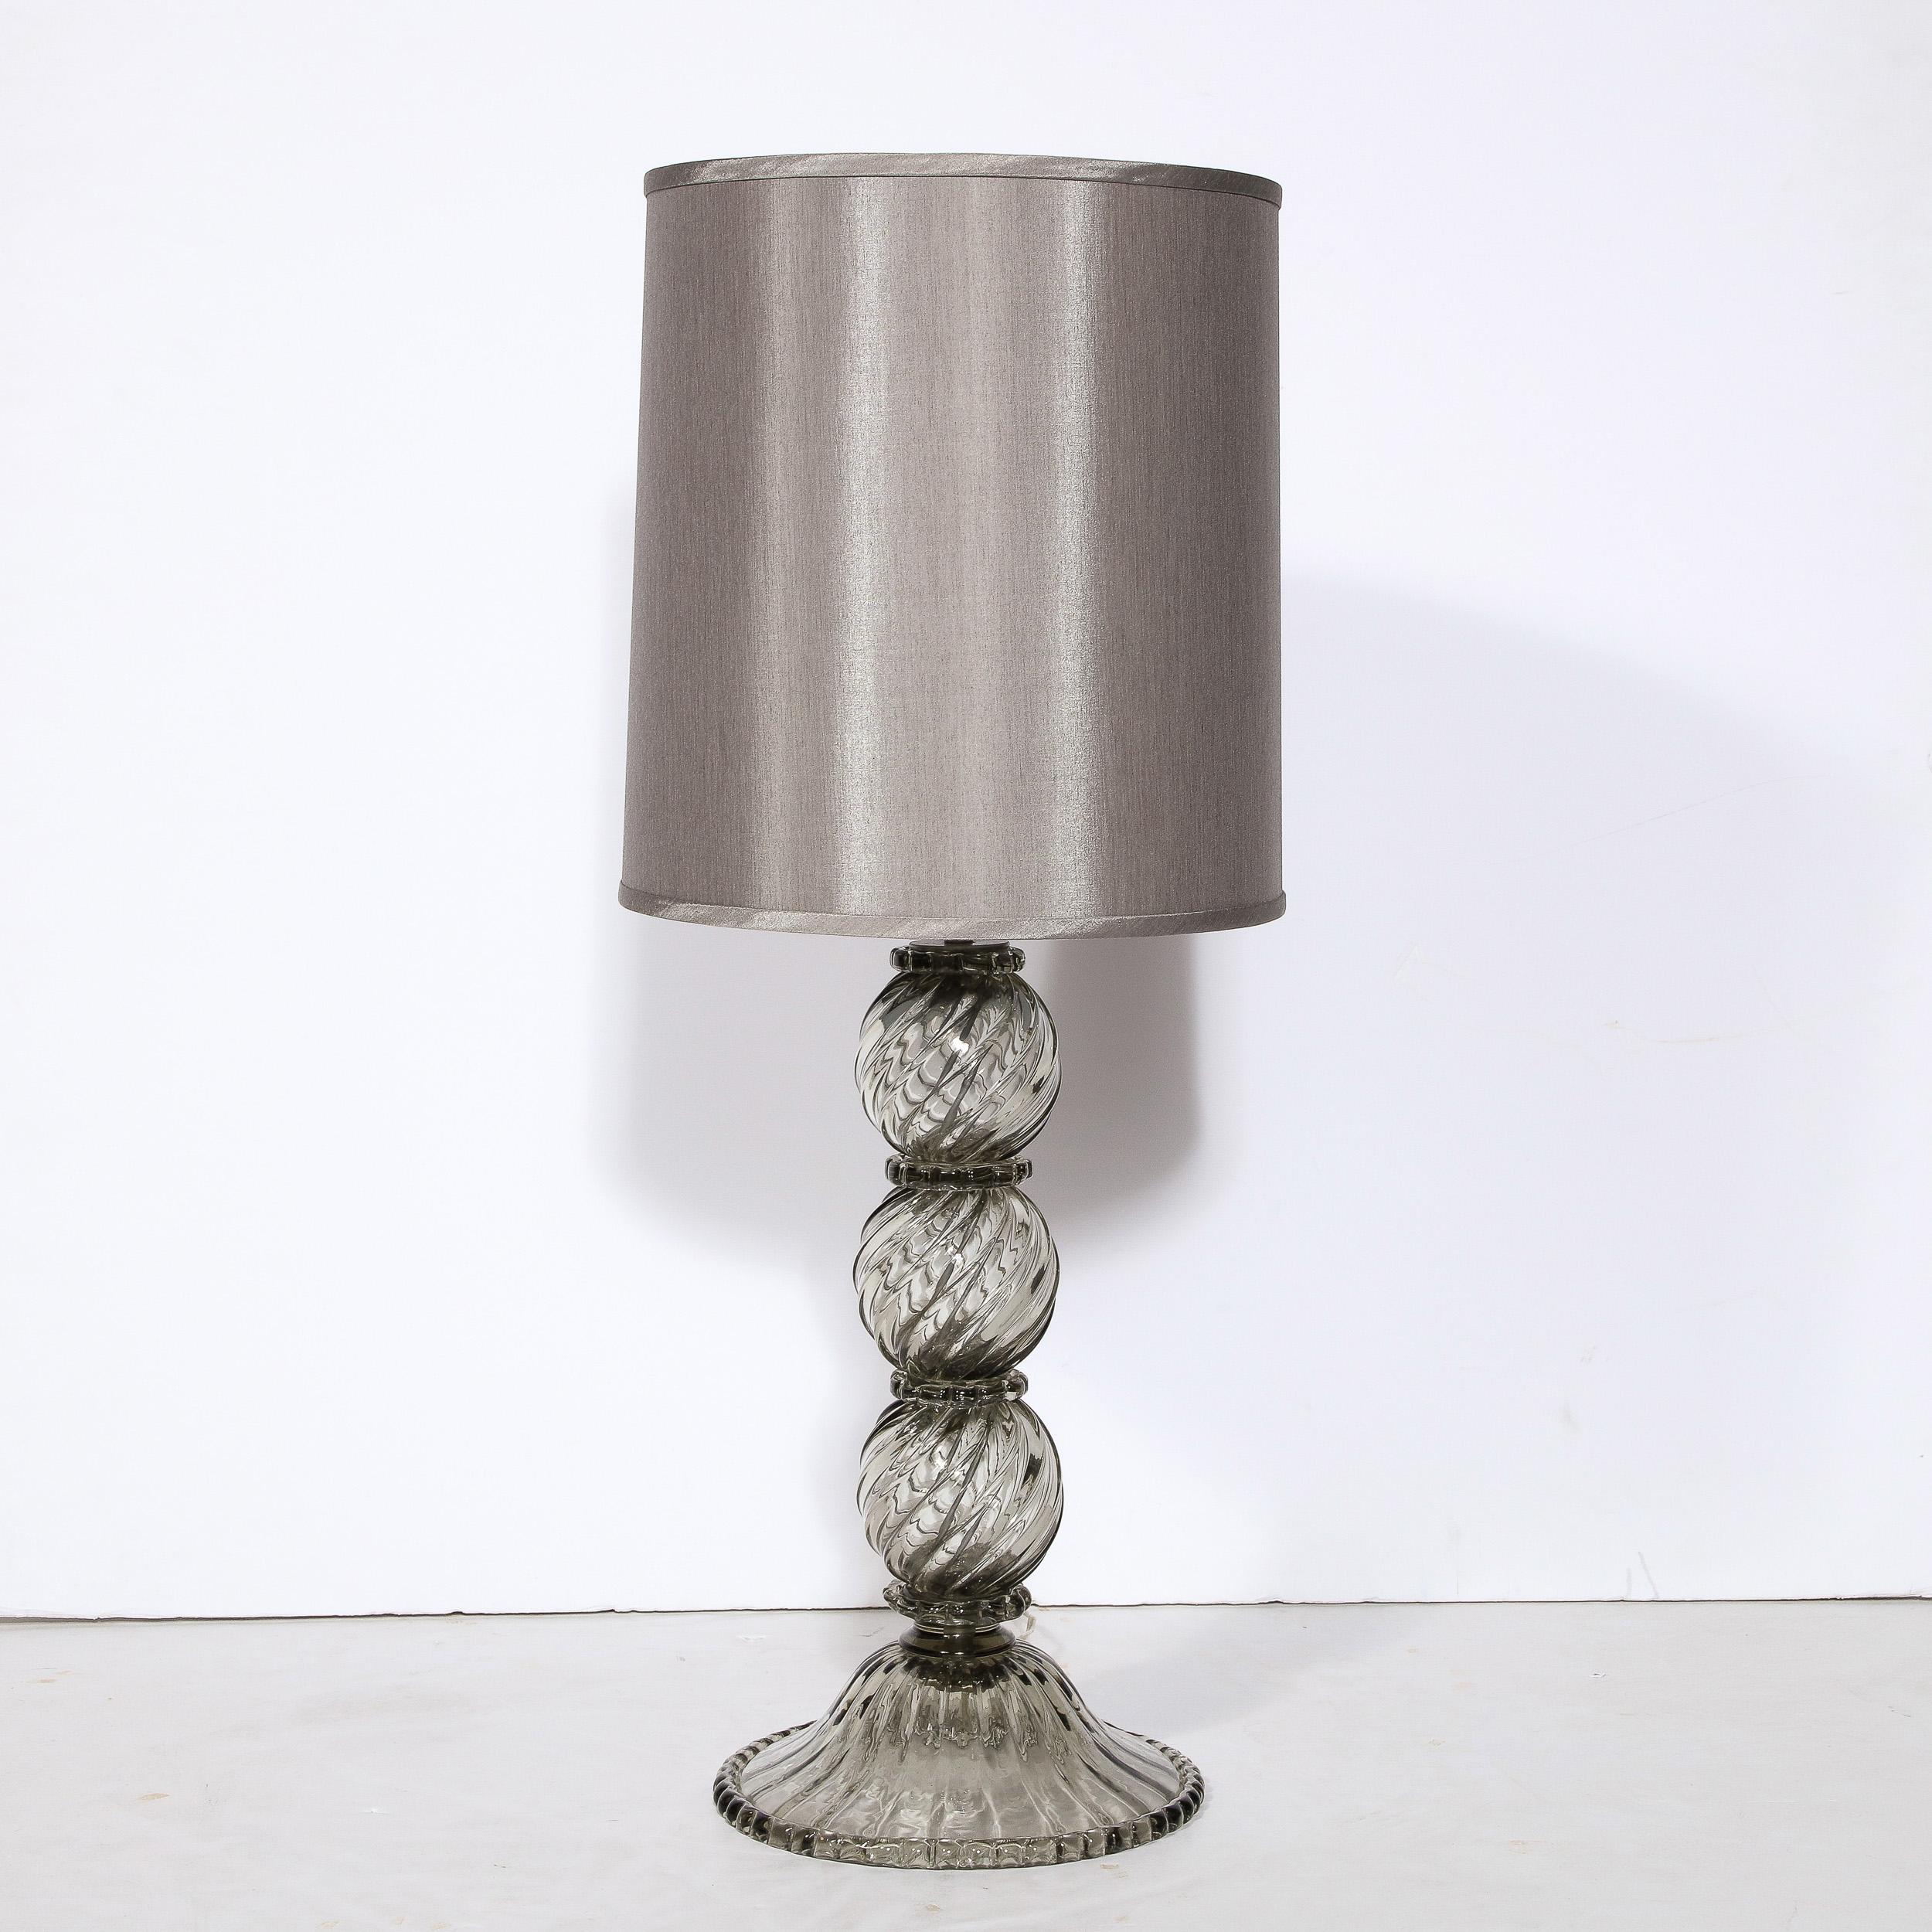 This stunning modernist table lamp was realized in Murano, Italy- the island off the coast of Venice renowned for centuries for its superlative glass production. It features a semi transparent smoked Murano glass with three orbital spheres with a